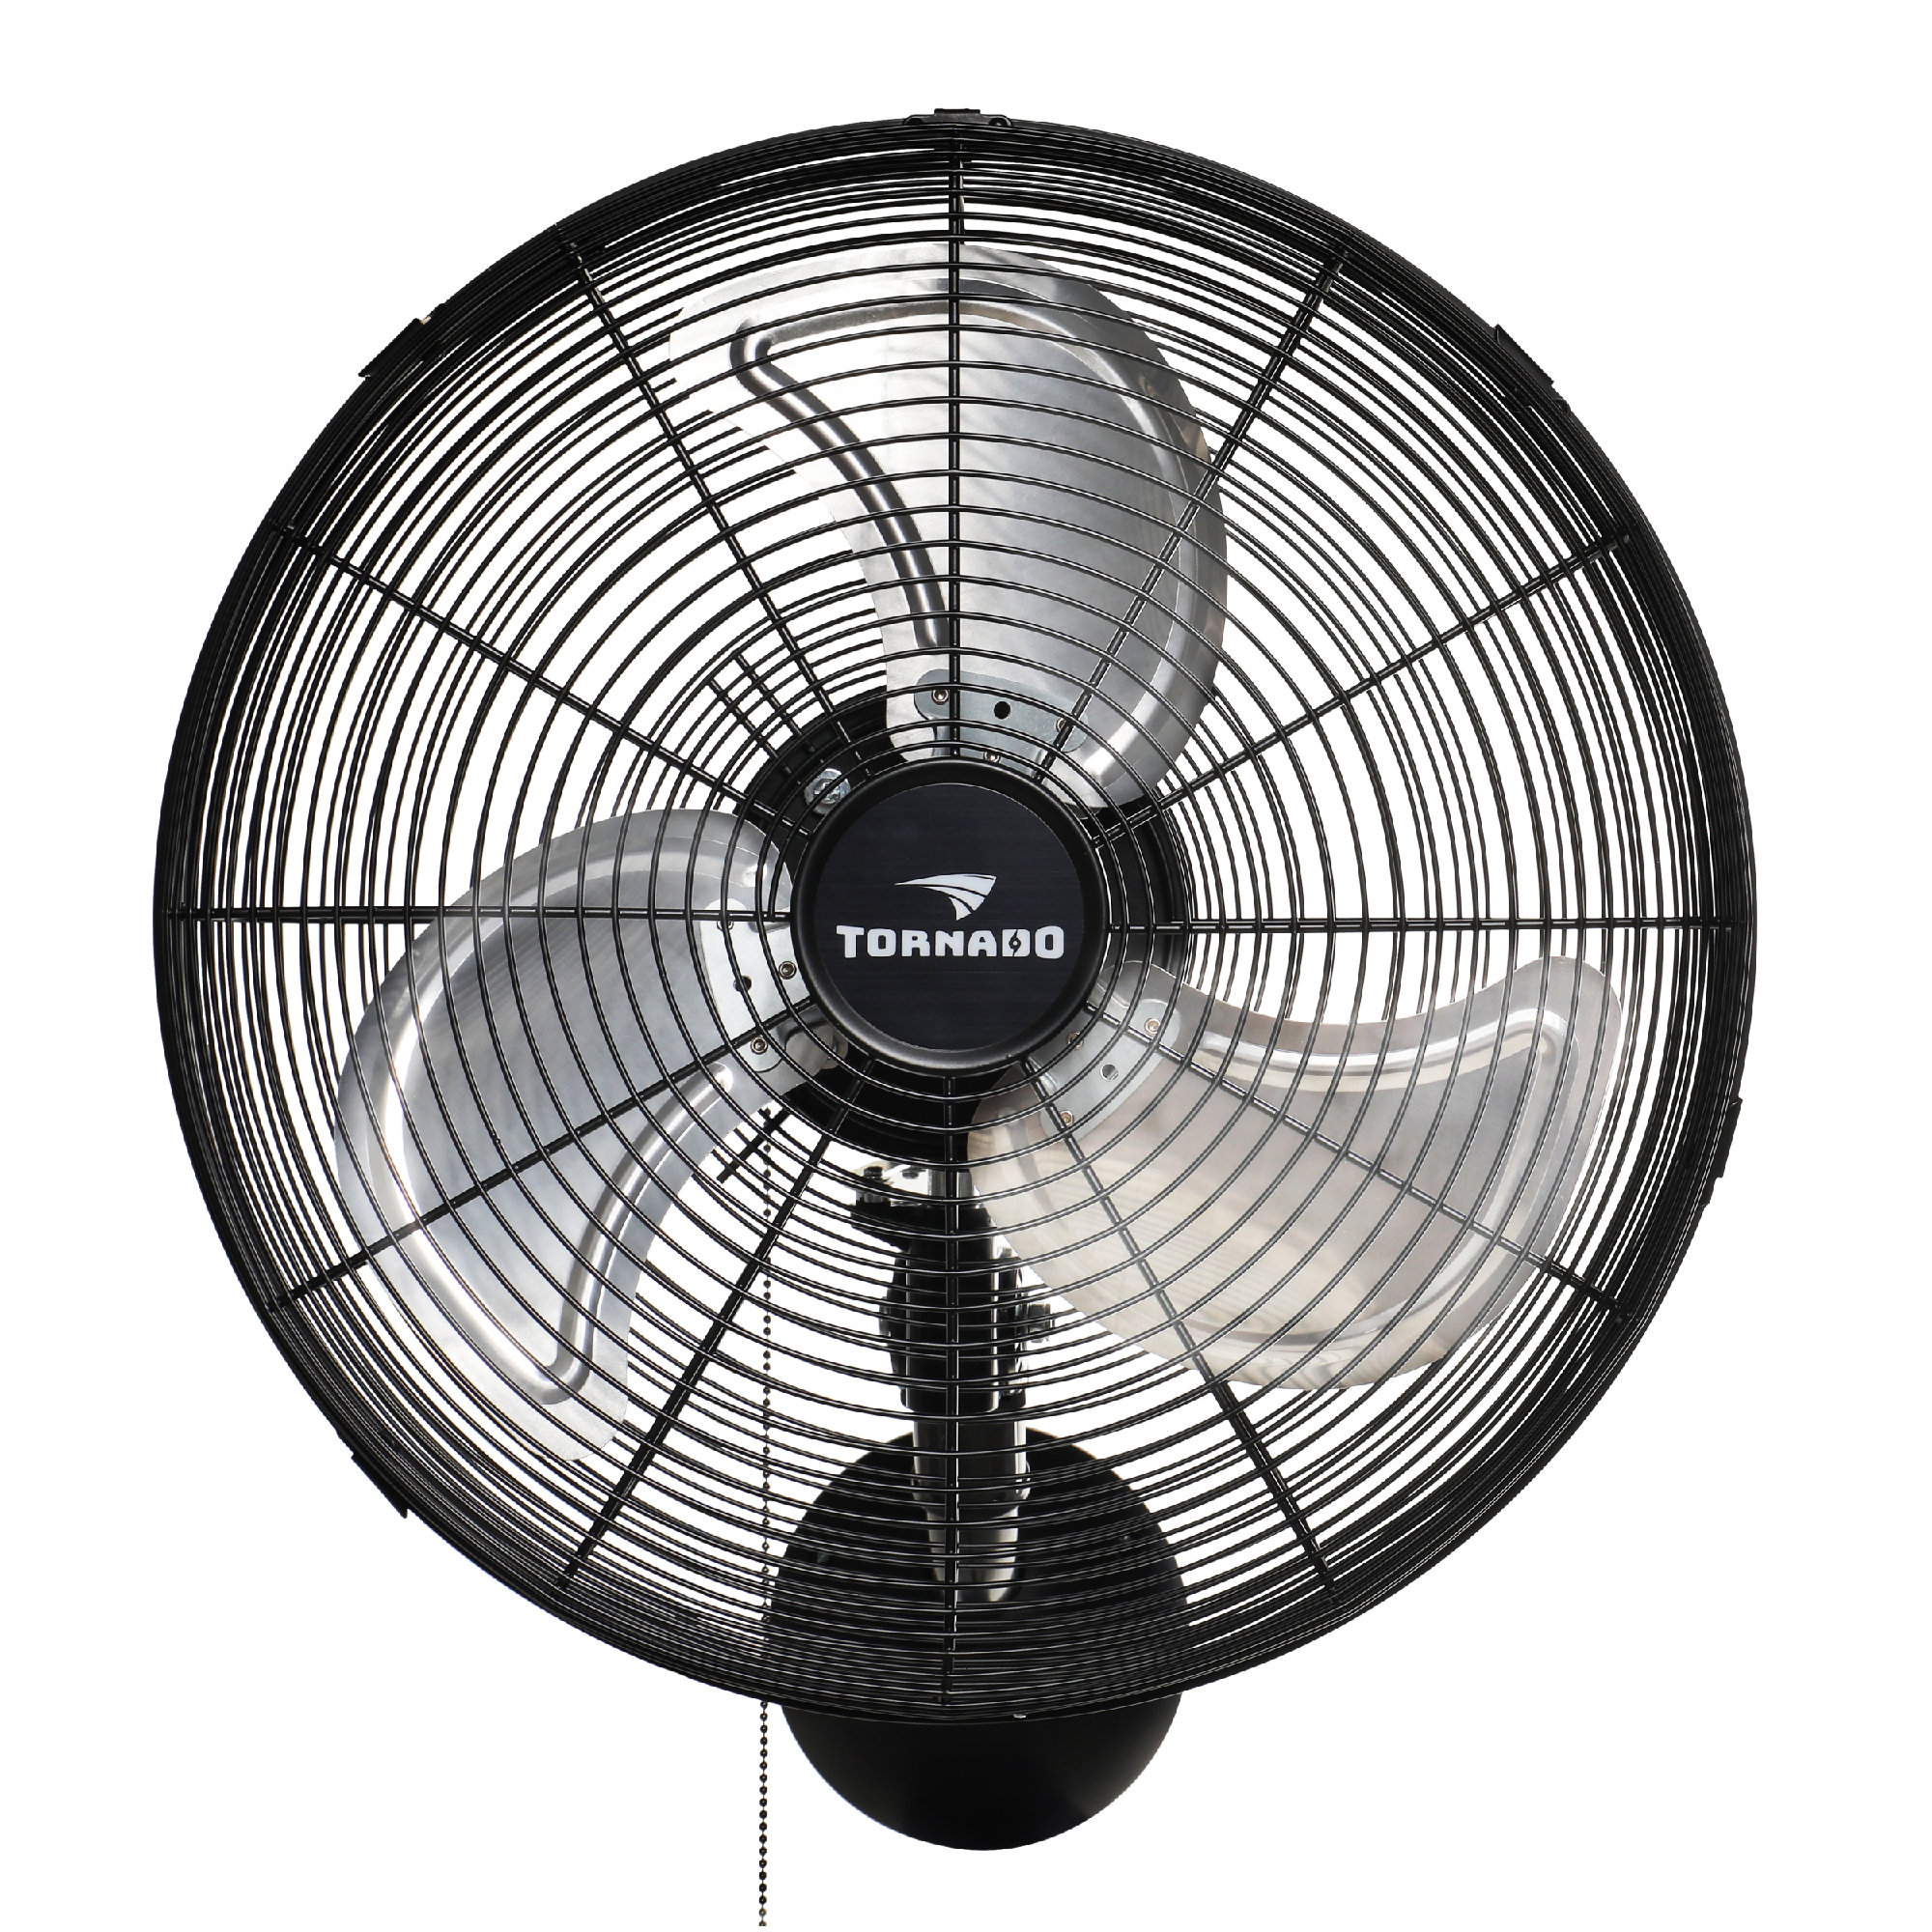 Anywhere 15.5 Anywhere Oscillating Wall Mounted Fan